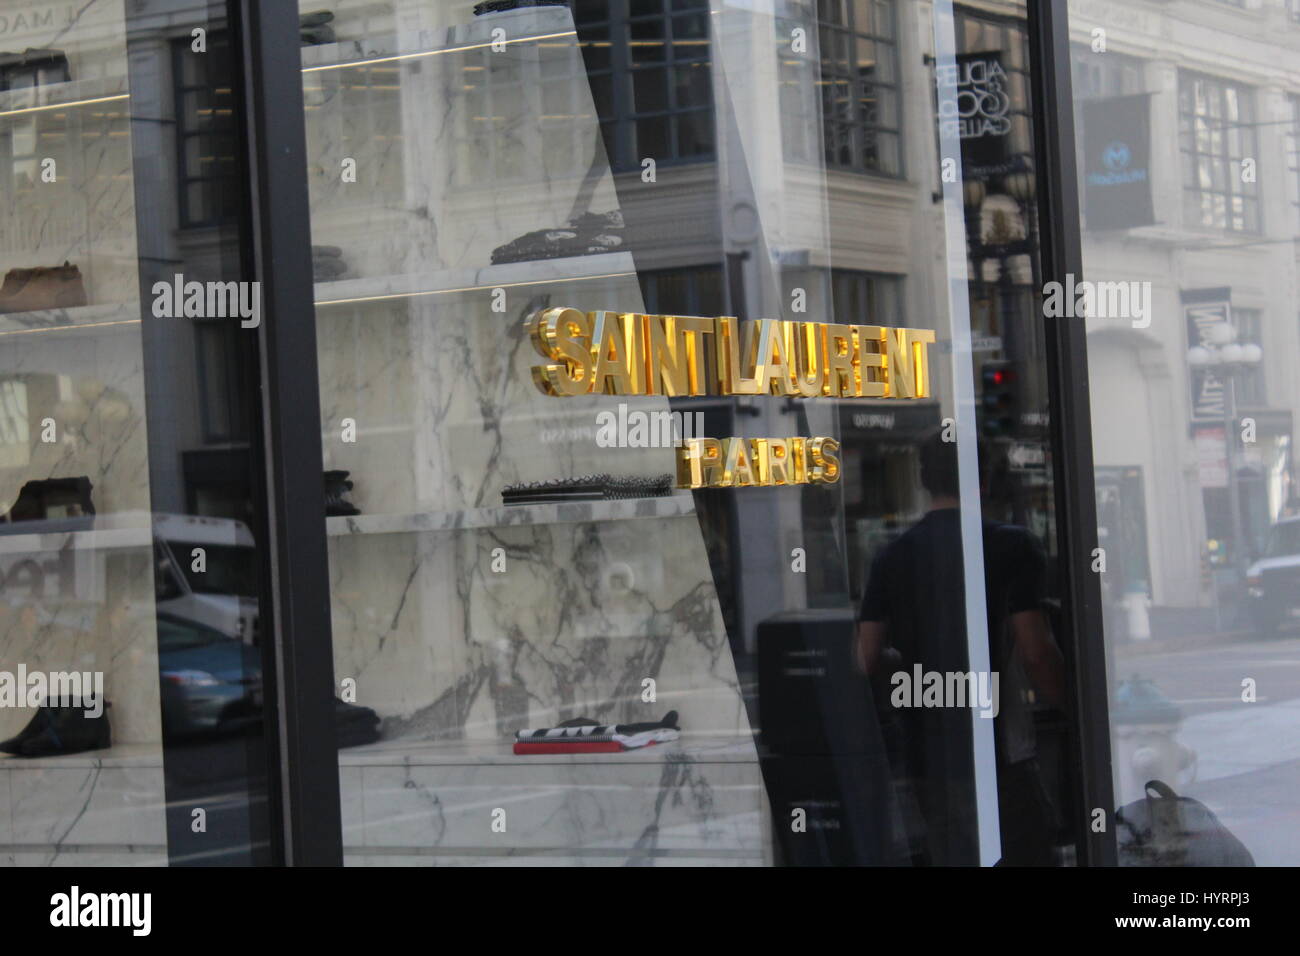 Ysl catwalk hi-res stock photography and images - Alamy